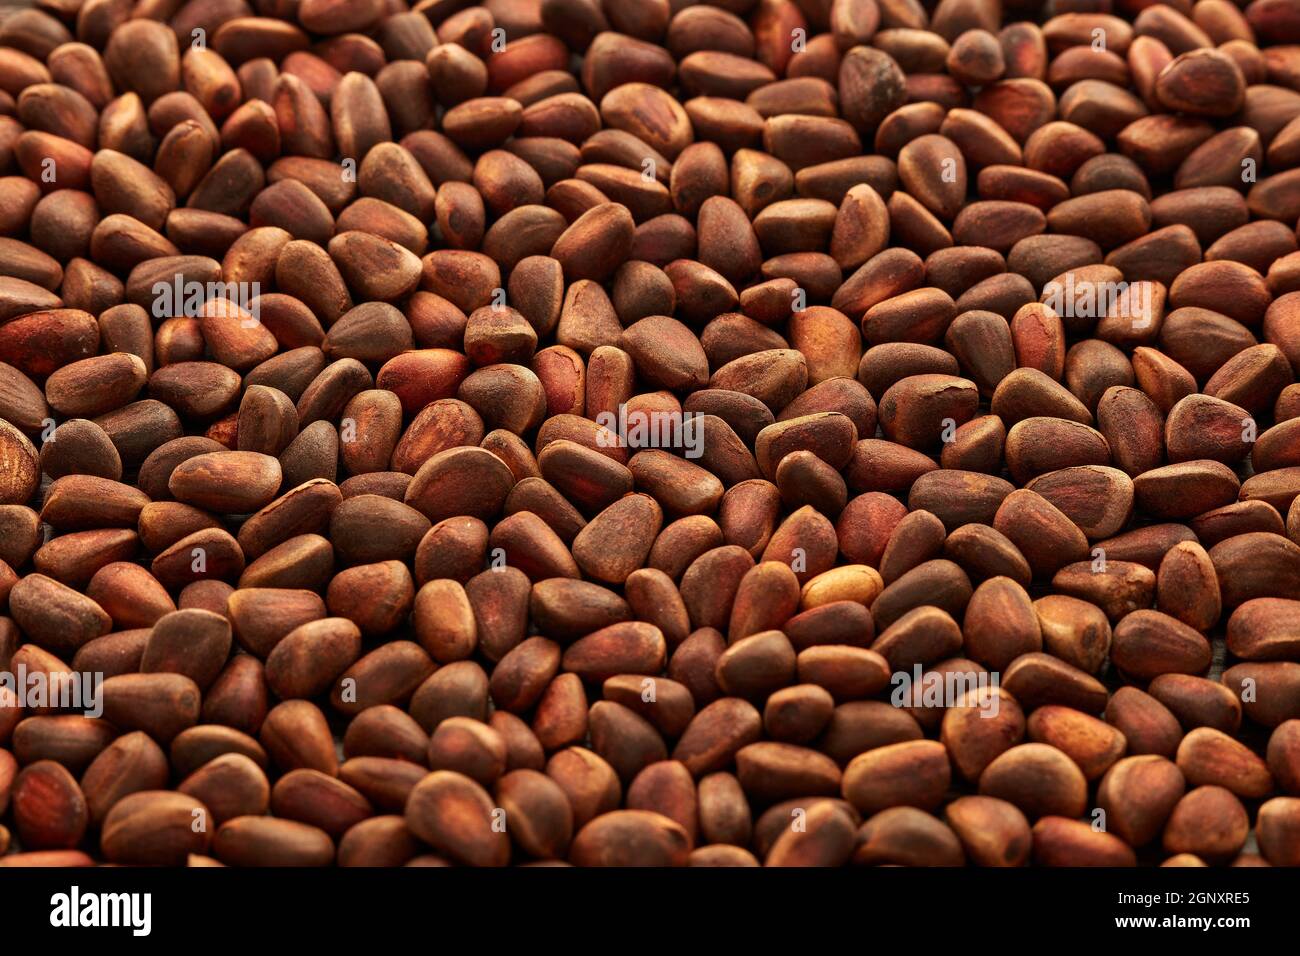 Background from pine nuts. Pinus sibirica, siberian pine nuts Stock Photo